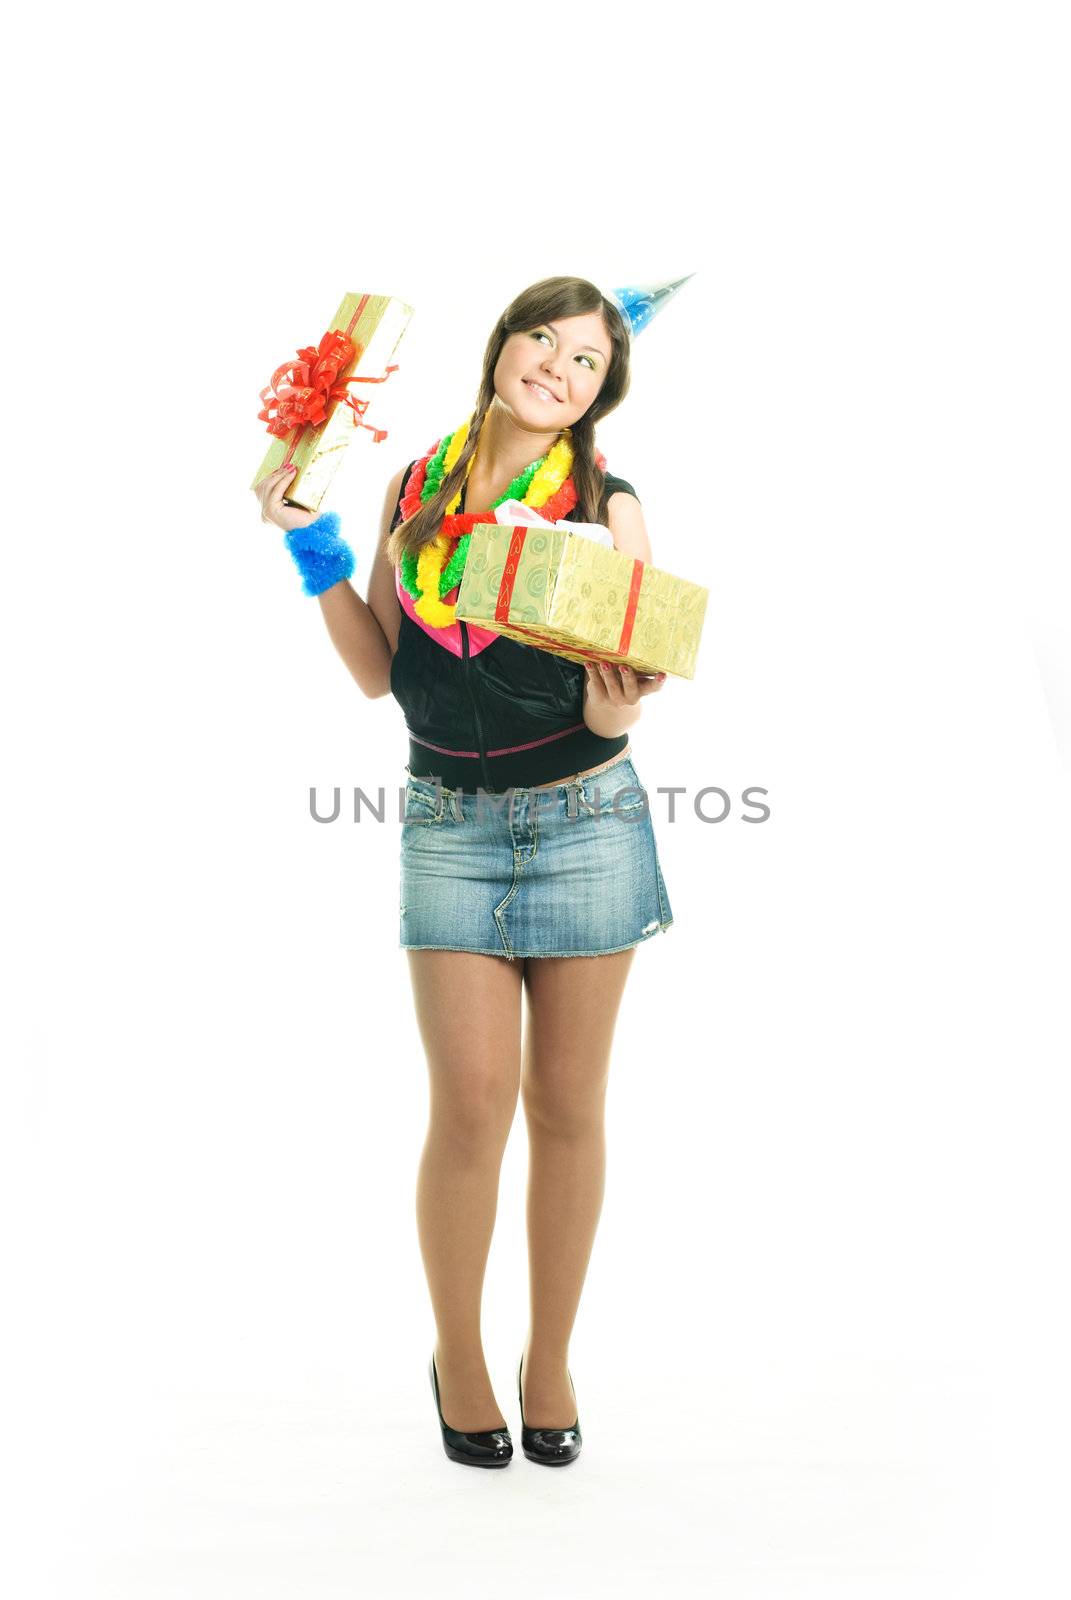 happy young beautiful girl with a present in her hands celebrating her birthday